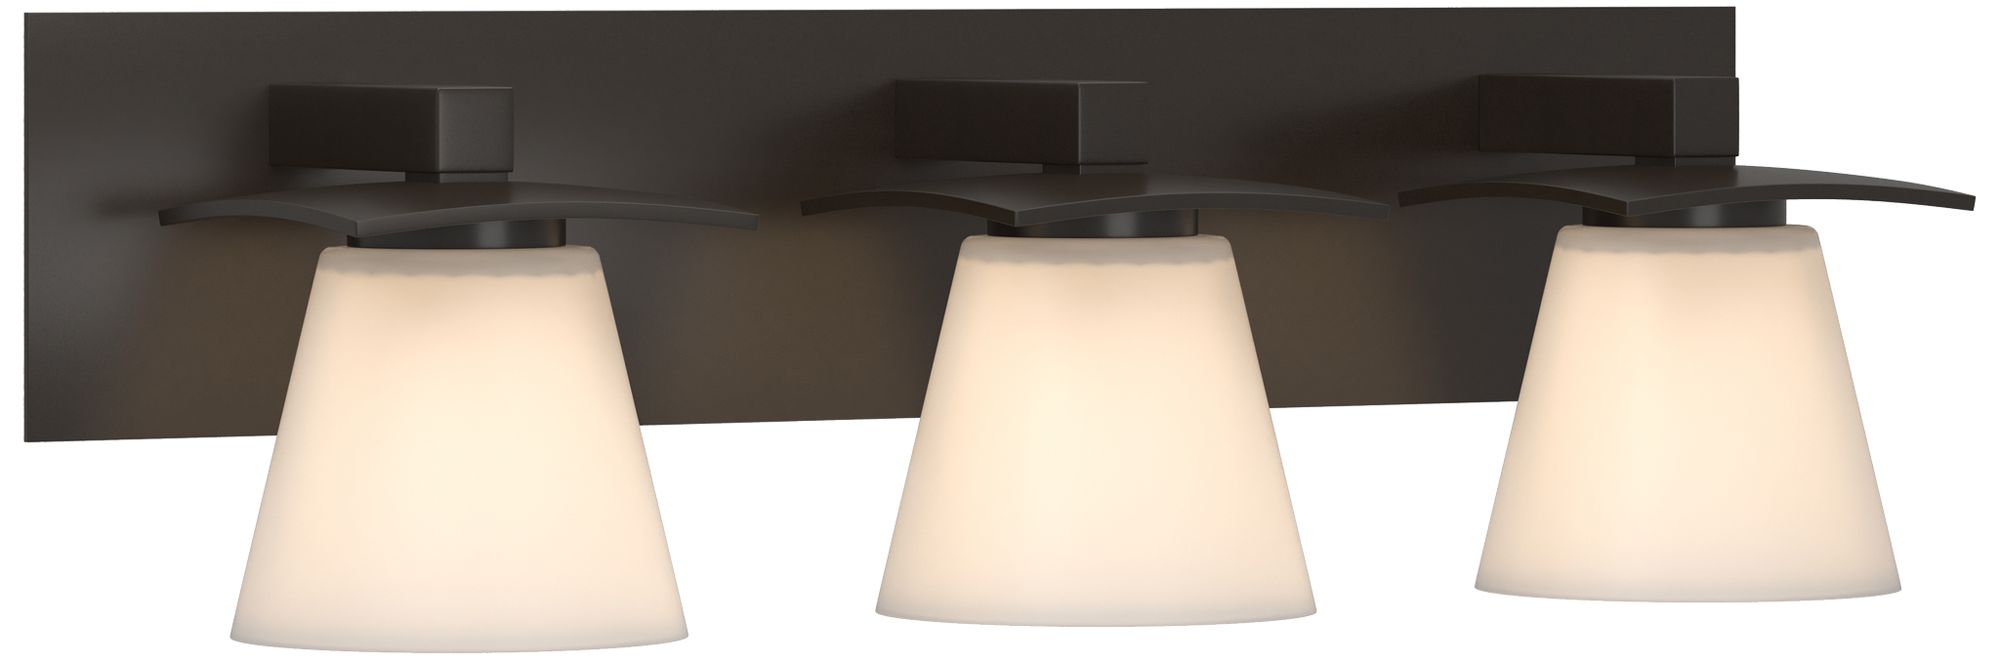 Wren 24" Wide 3 Light Oil Rubbed Bronze Sconce With Opal Glass Shade